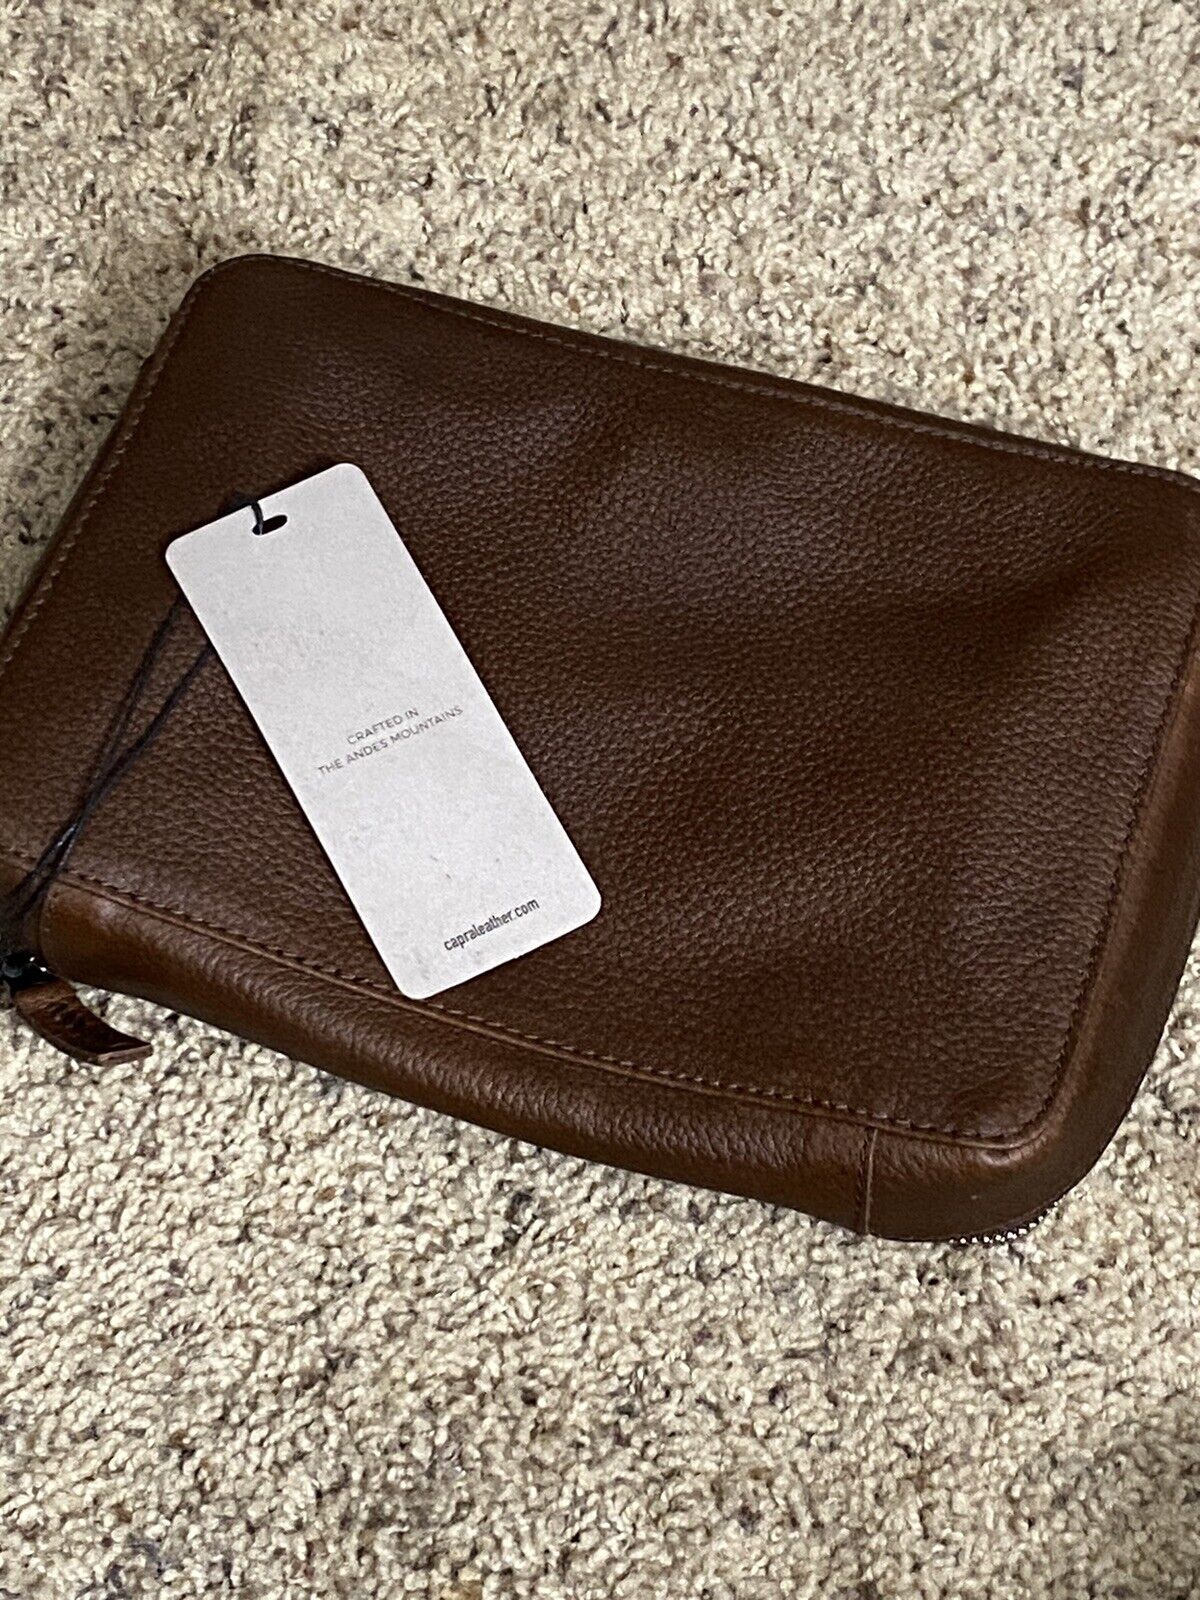 Capra Small Gear Case All Leather, Hand Made in the Andes Mountains So Soft